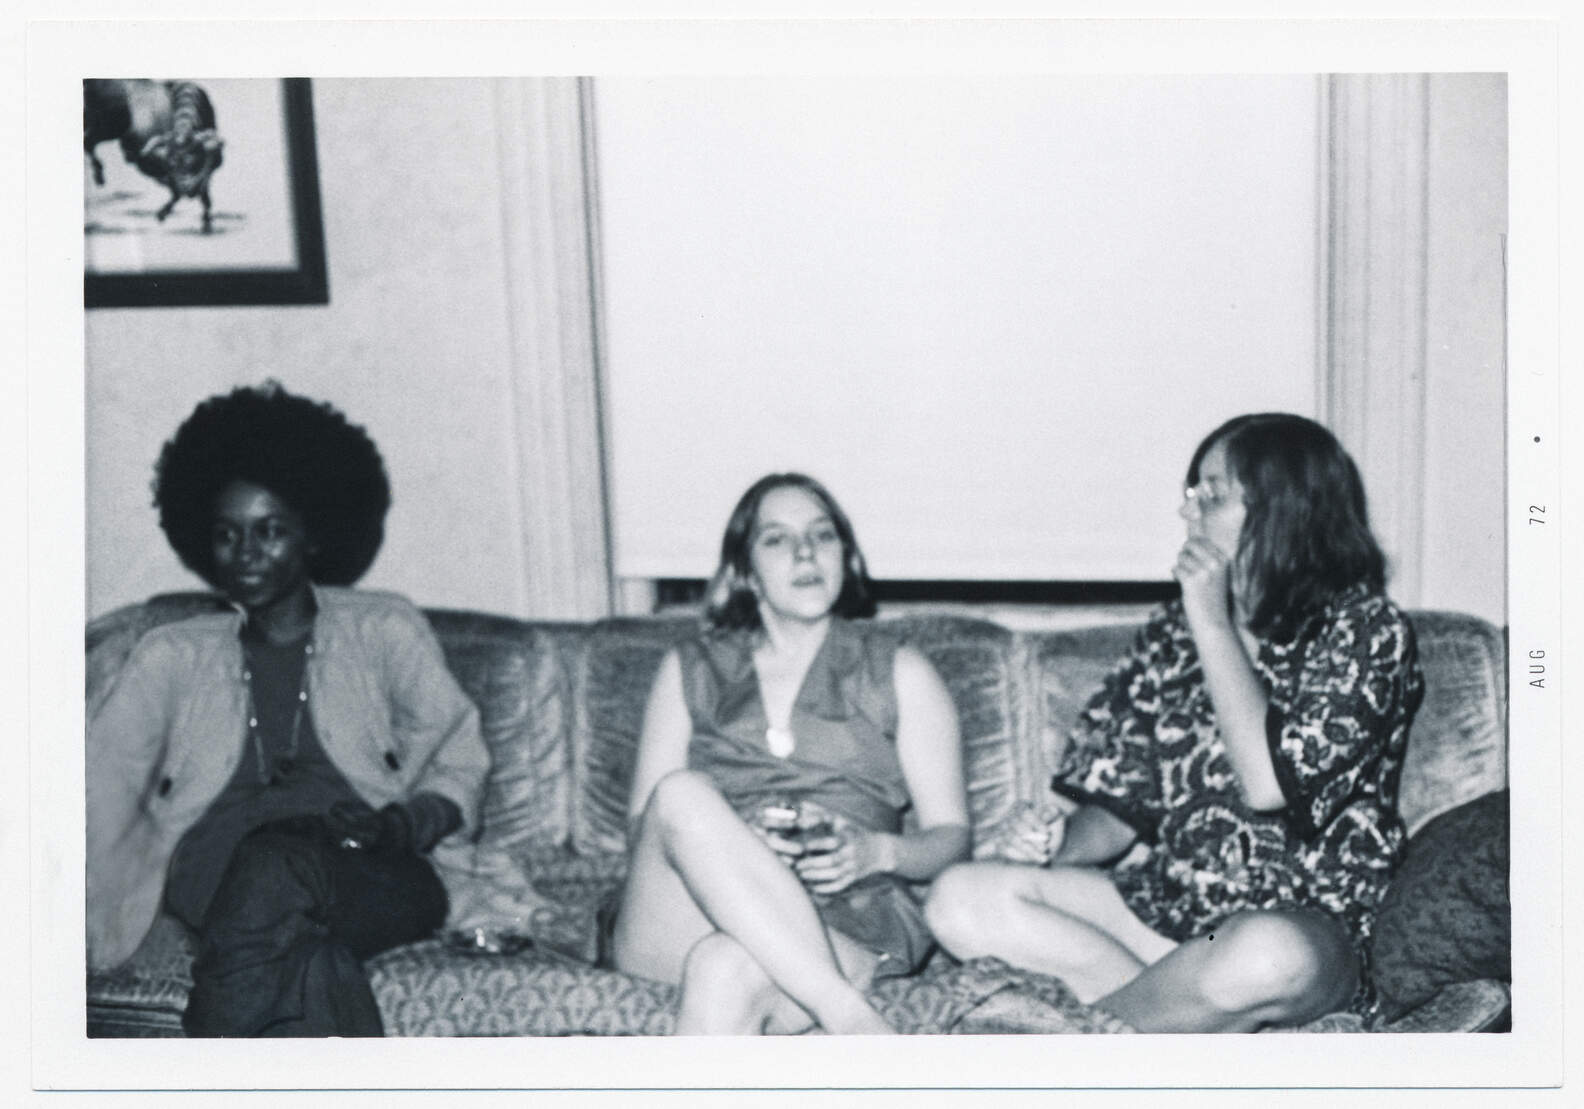 A black-and-white image of the members of the underground network of abortion providers, the Janes, from August 1972. Image from Emma Pildes and Tia Lessin’s ‘The Janes.’ Courtesy of HBO.